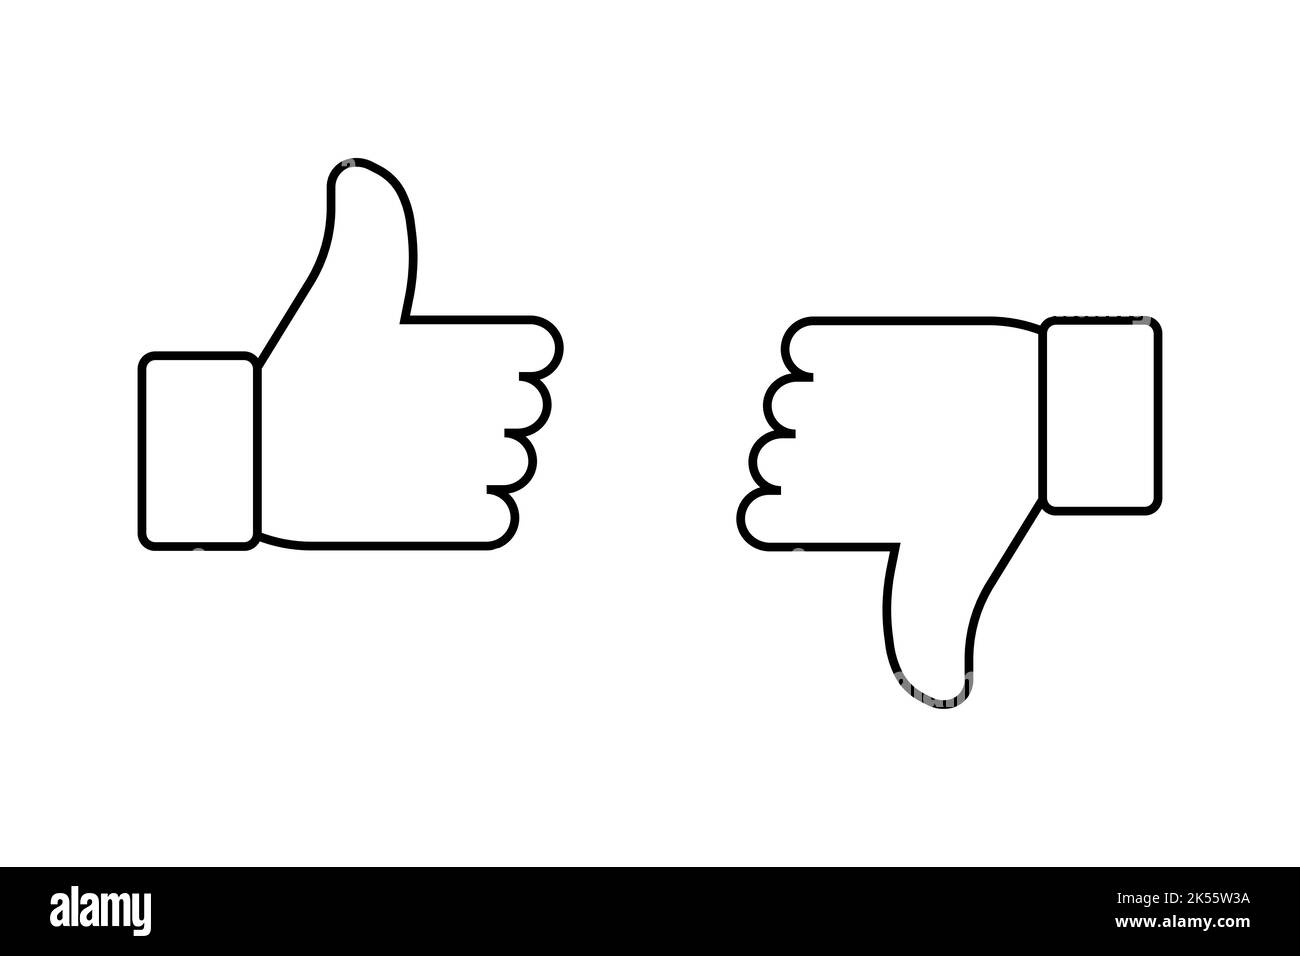 Like and dislike icon simple design Stock Vector